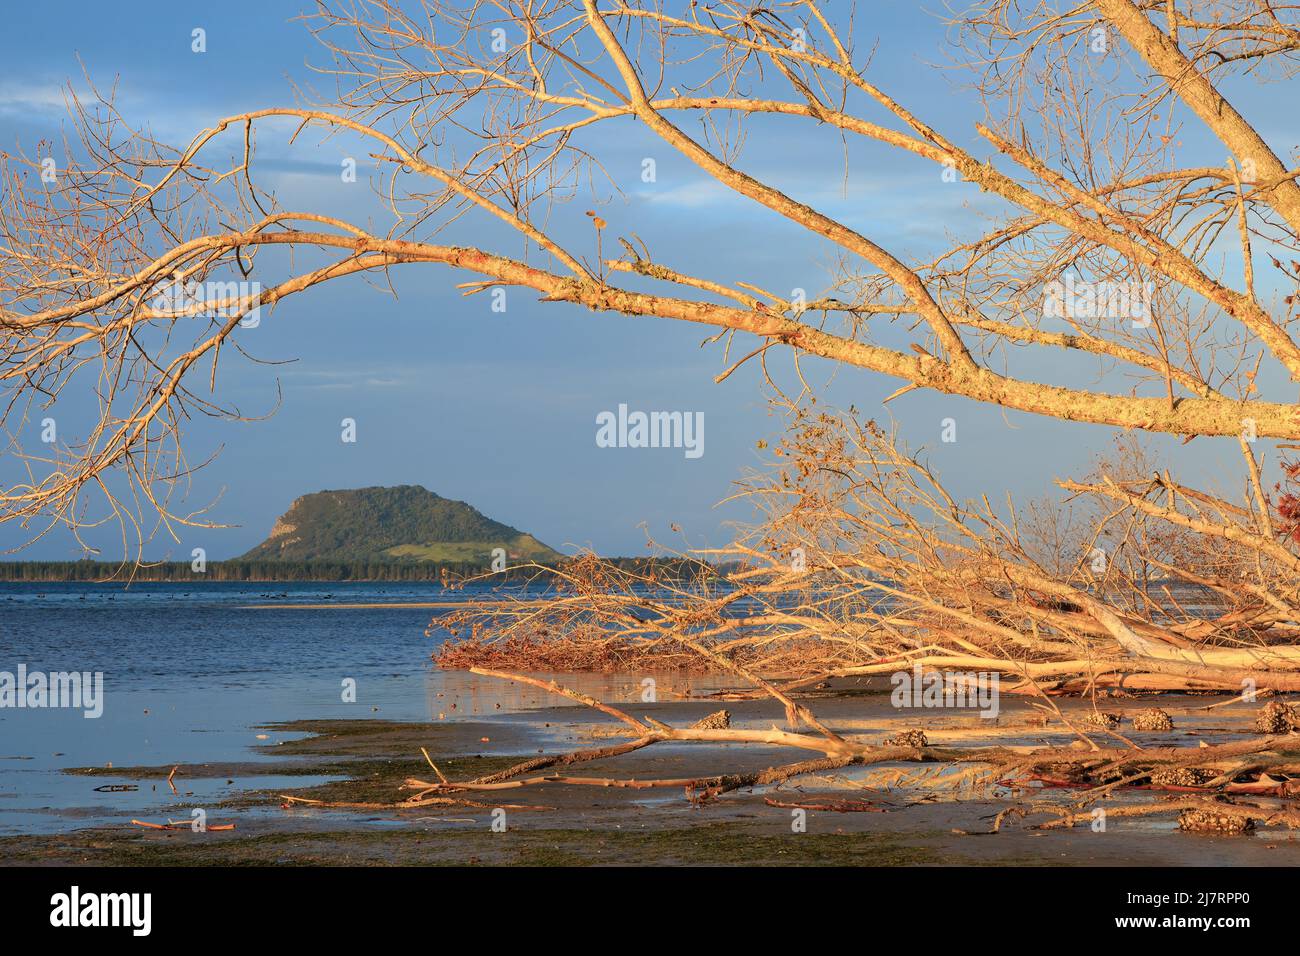 Mount Maunganui, New Zealand, framed by trees on the other side of Tauranga Harbour Stock Photo